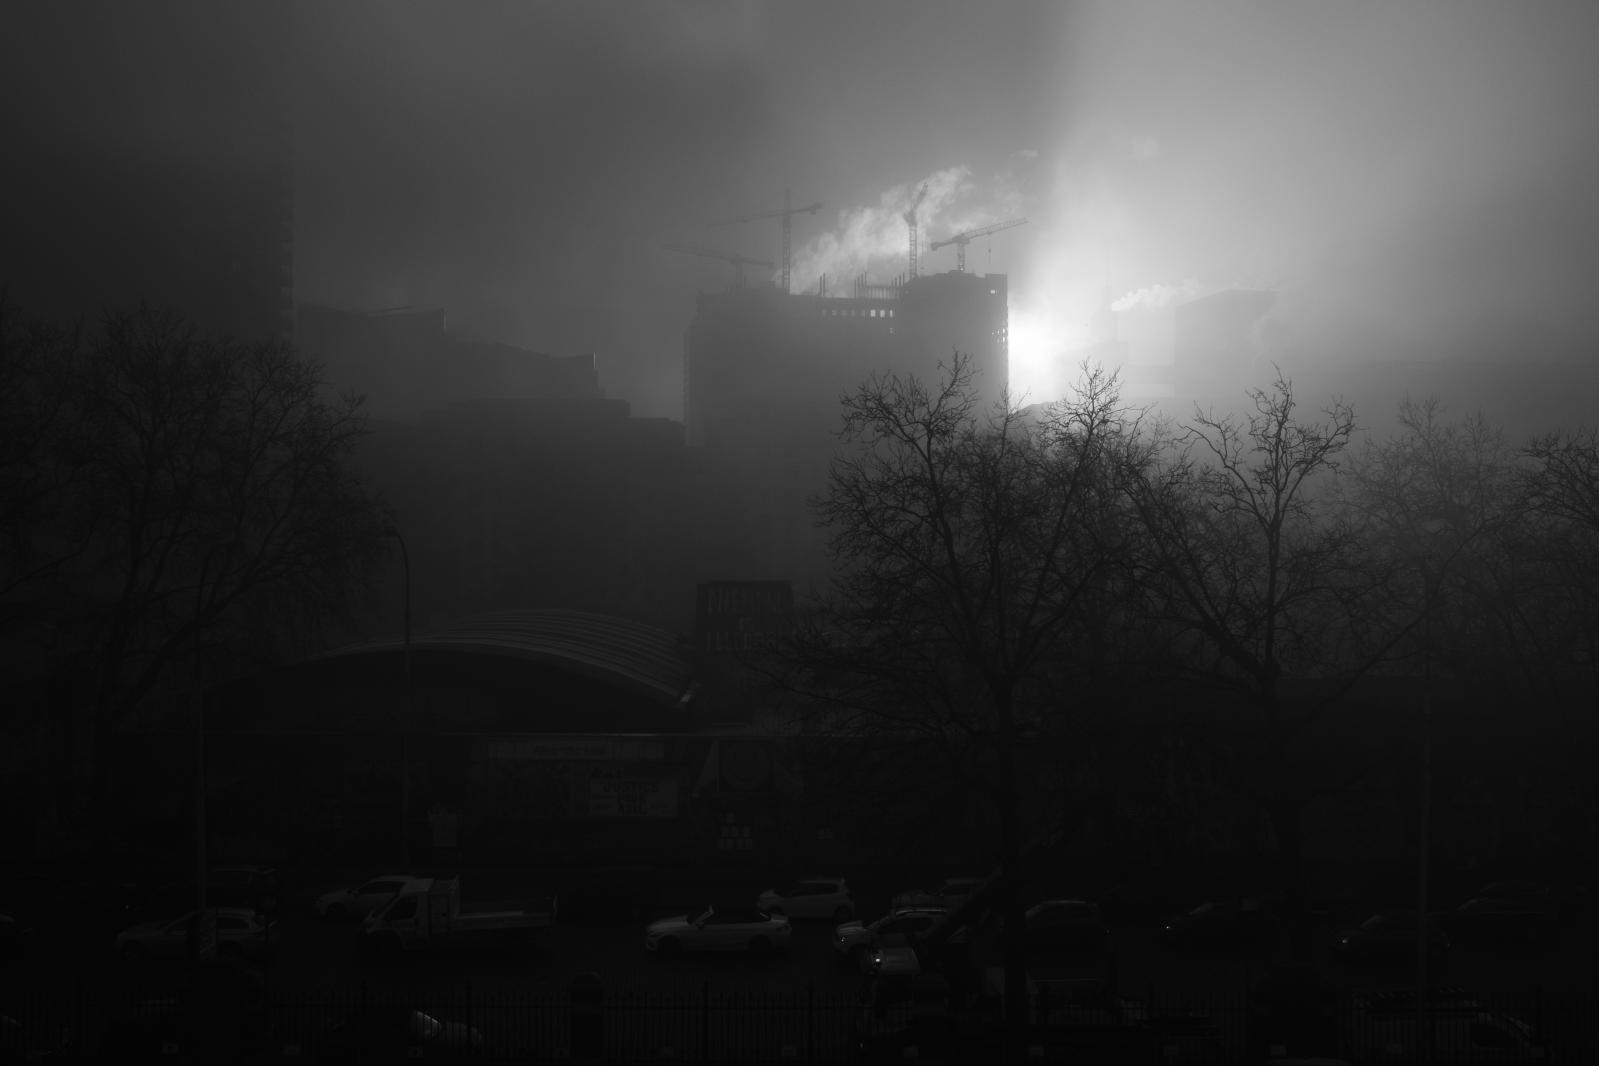 Office in the mist | Buy this image